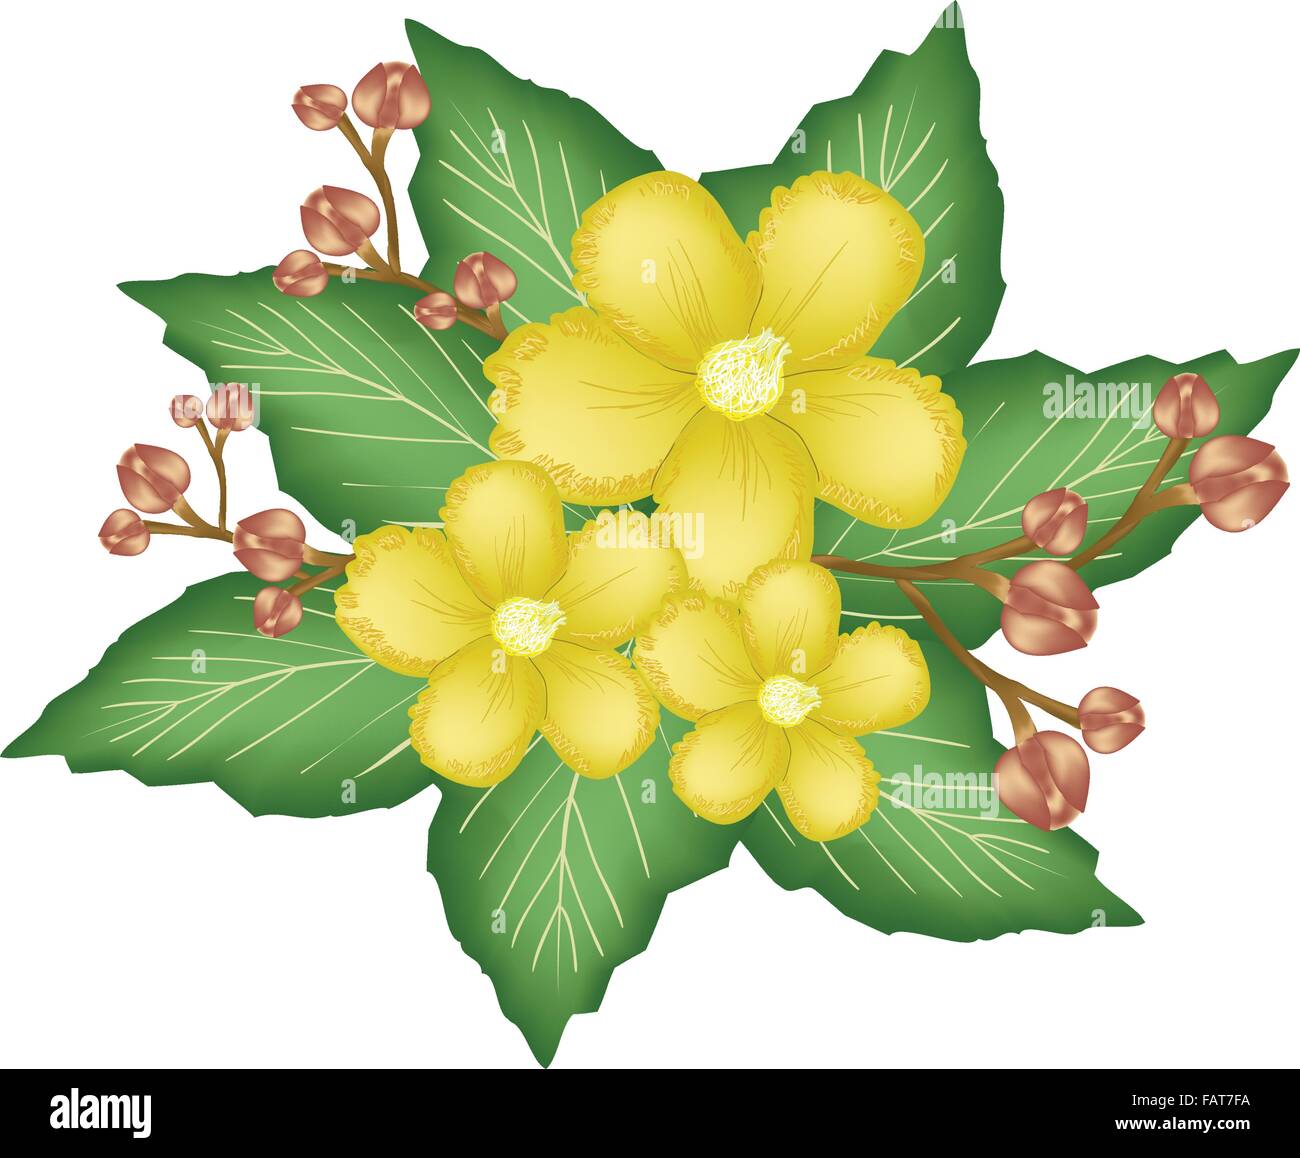 Beautiful Flower, An Illustration Group of Fresh Simpor Flowers or Dillenia Flowers on Green Leaves Isolated on A White Backgrou Stock Vector